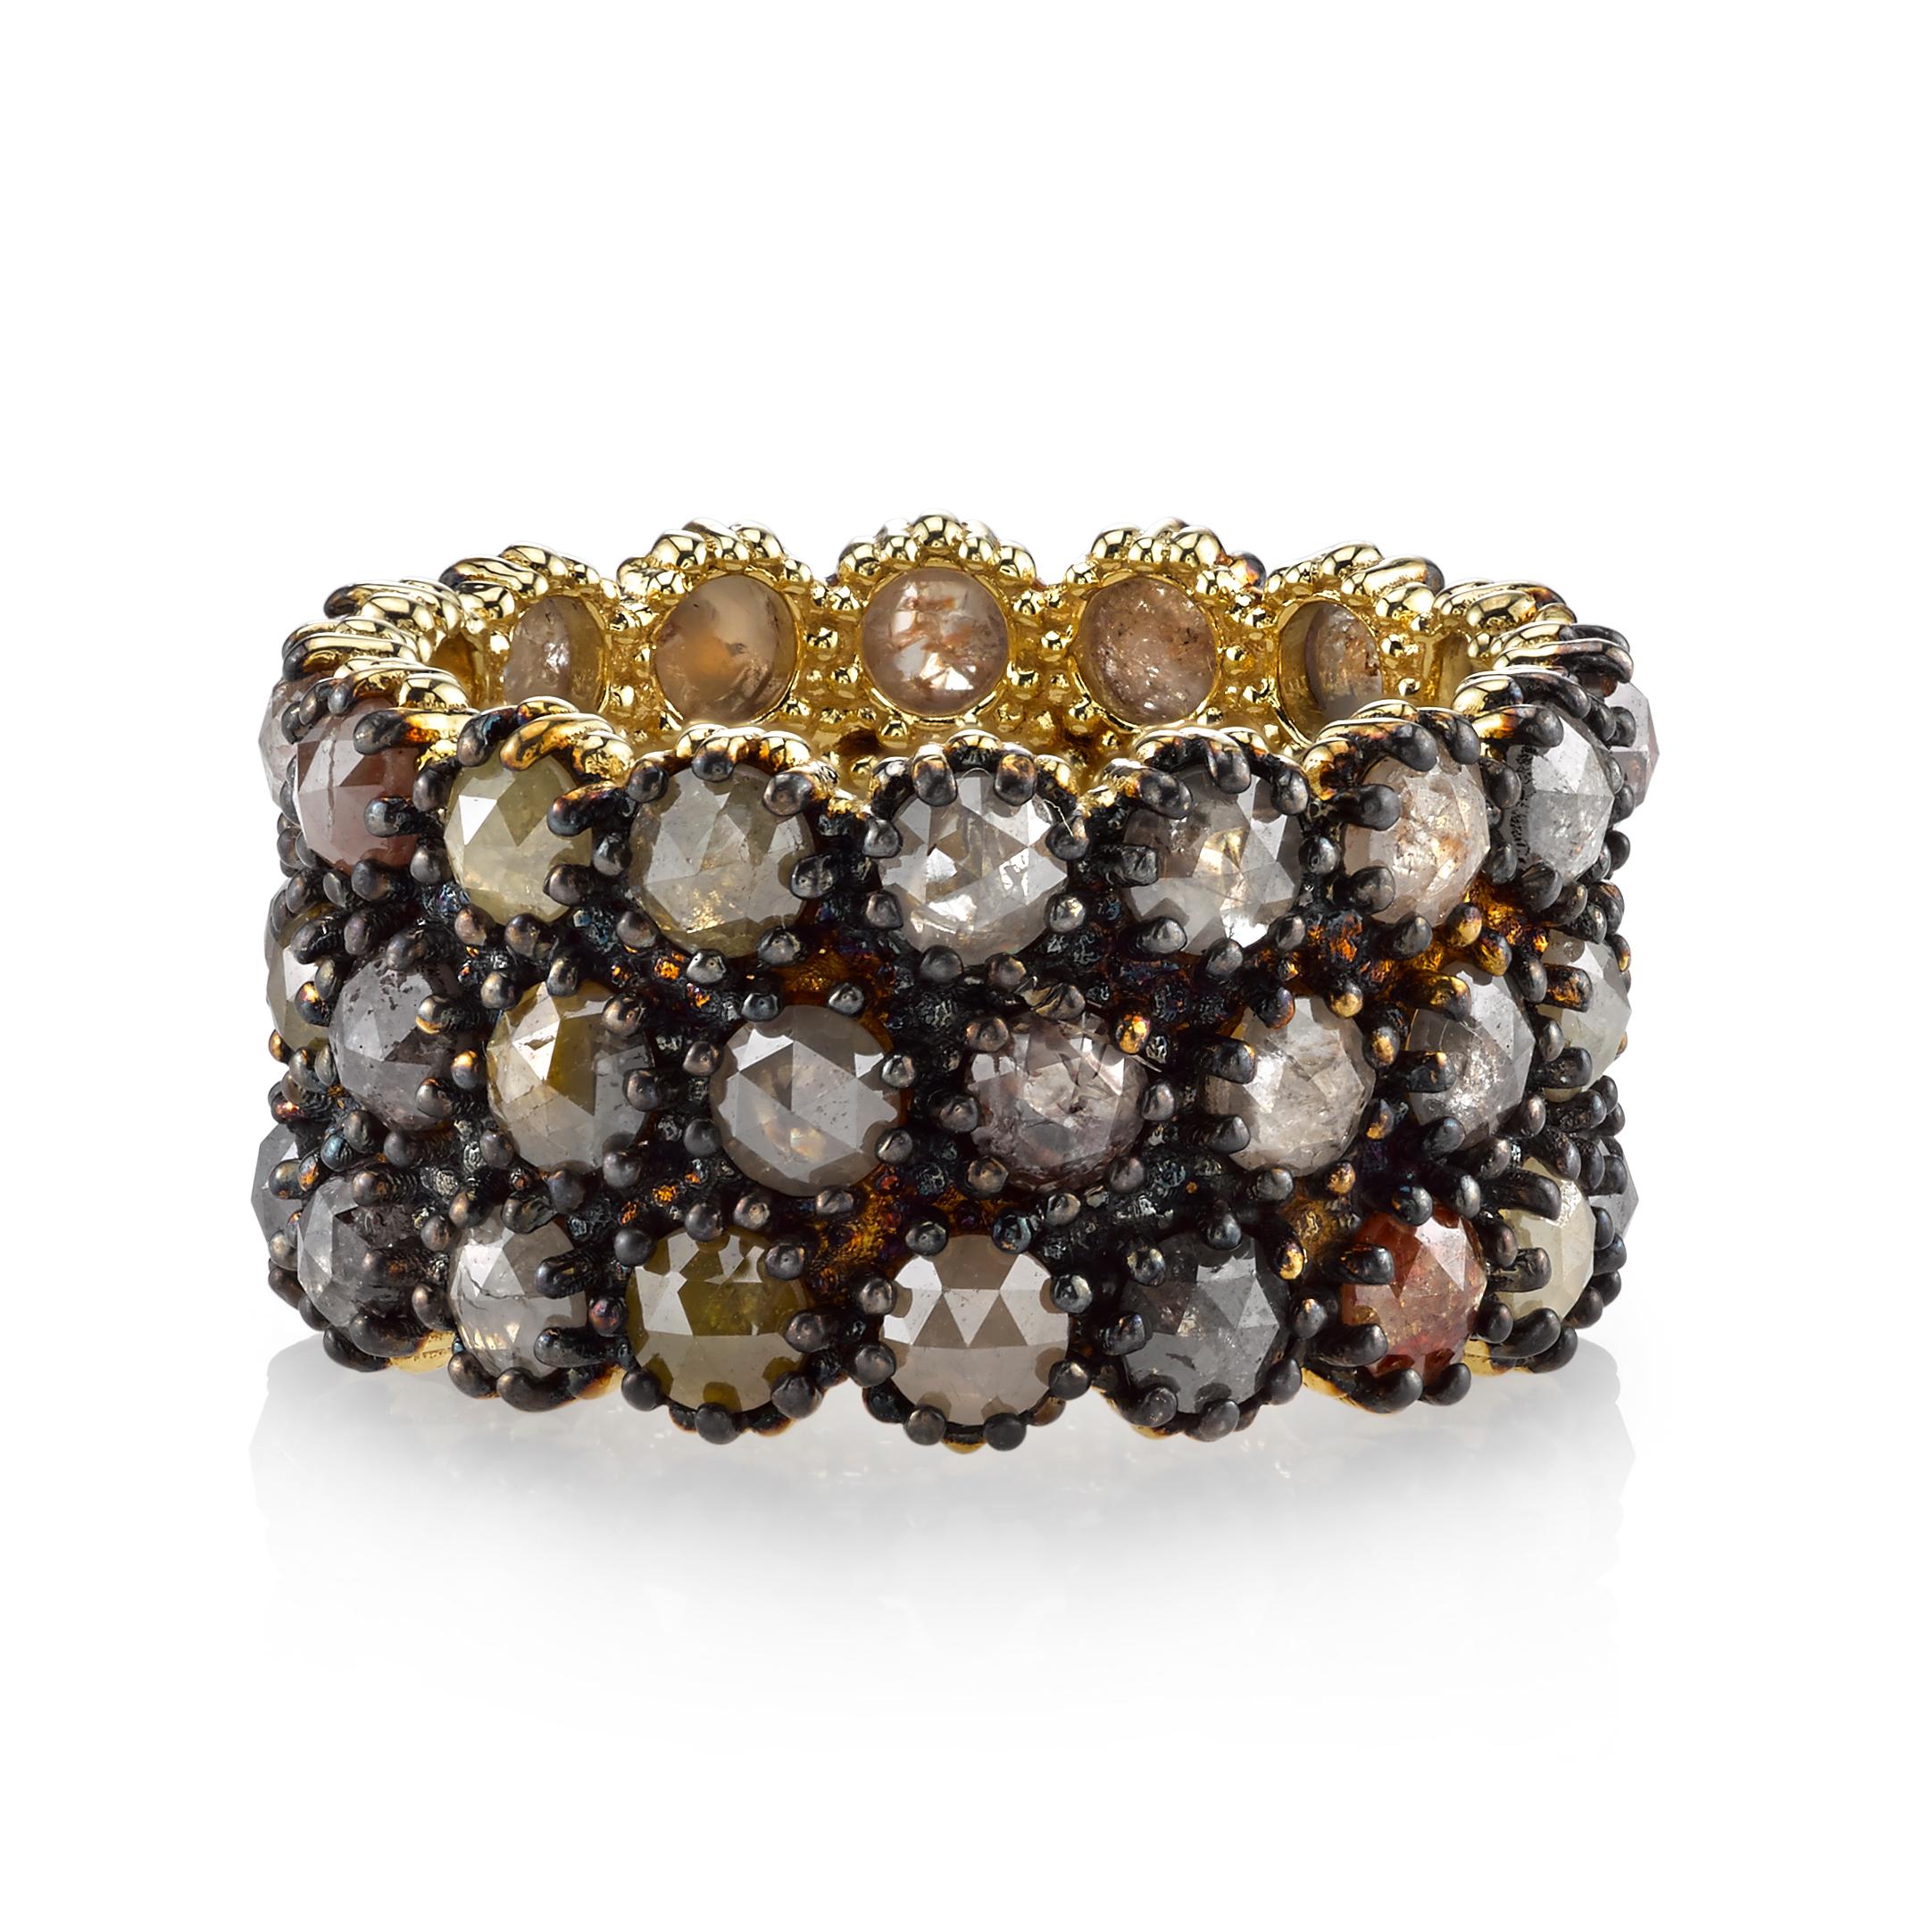 This 18 Karat Yellow Gold band is perfect for a woman on the cutting edge of style that isn't afraid to make a bold statement. The Black Rhodium finish perfectly complements the muted, Earth tones of the Rustic Diamonds that elegantly wrap around